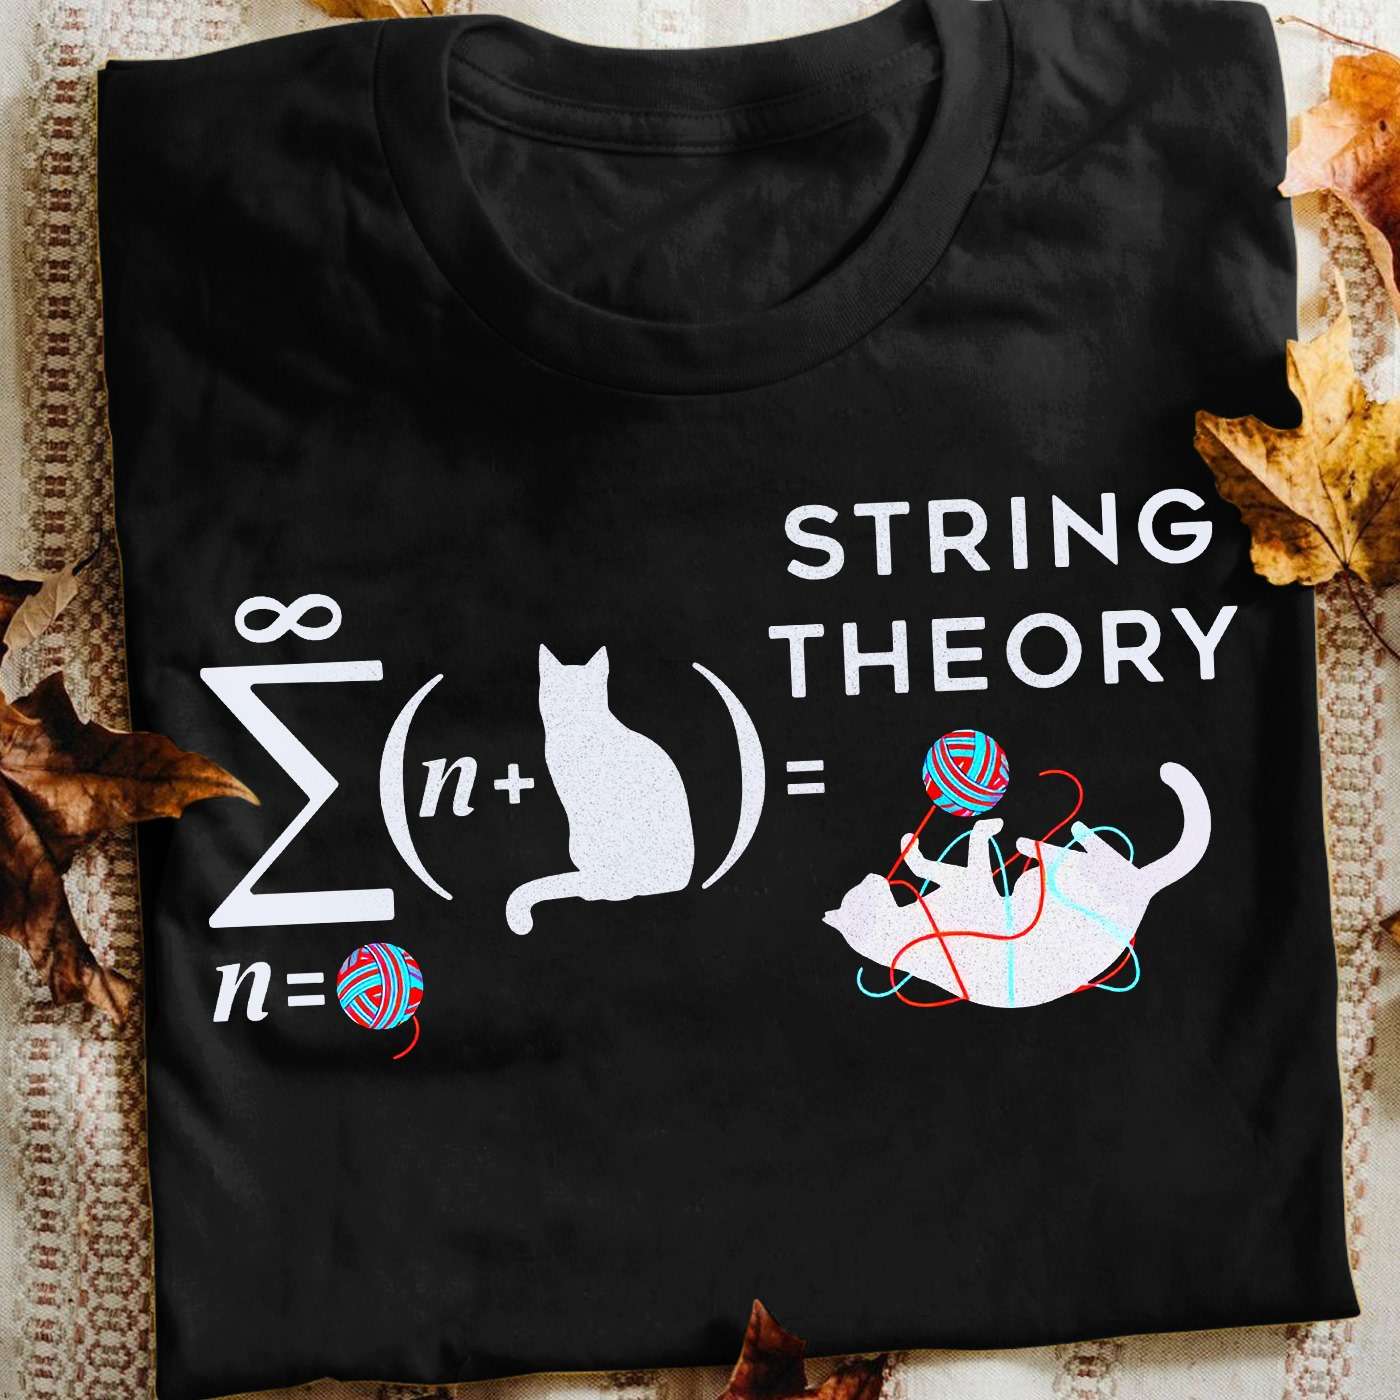 String theory - Cat playing with yarn, gift for cat person